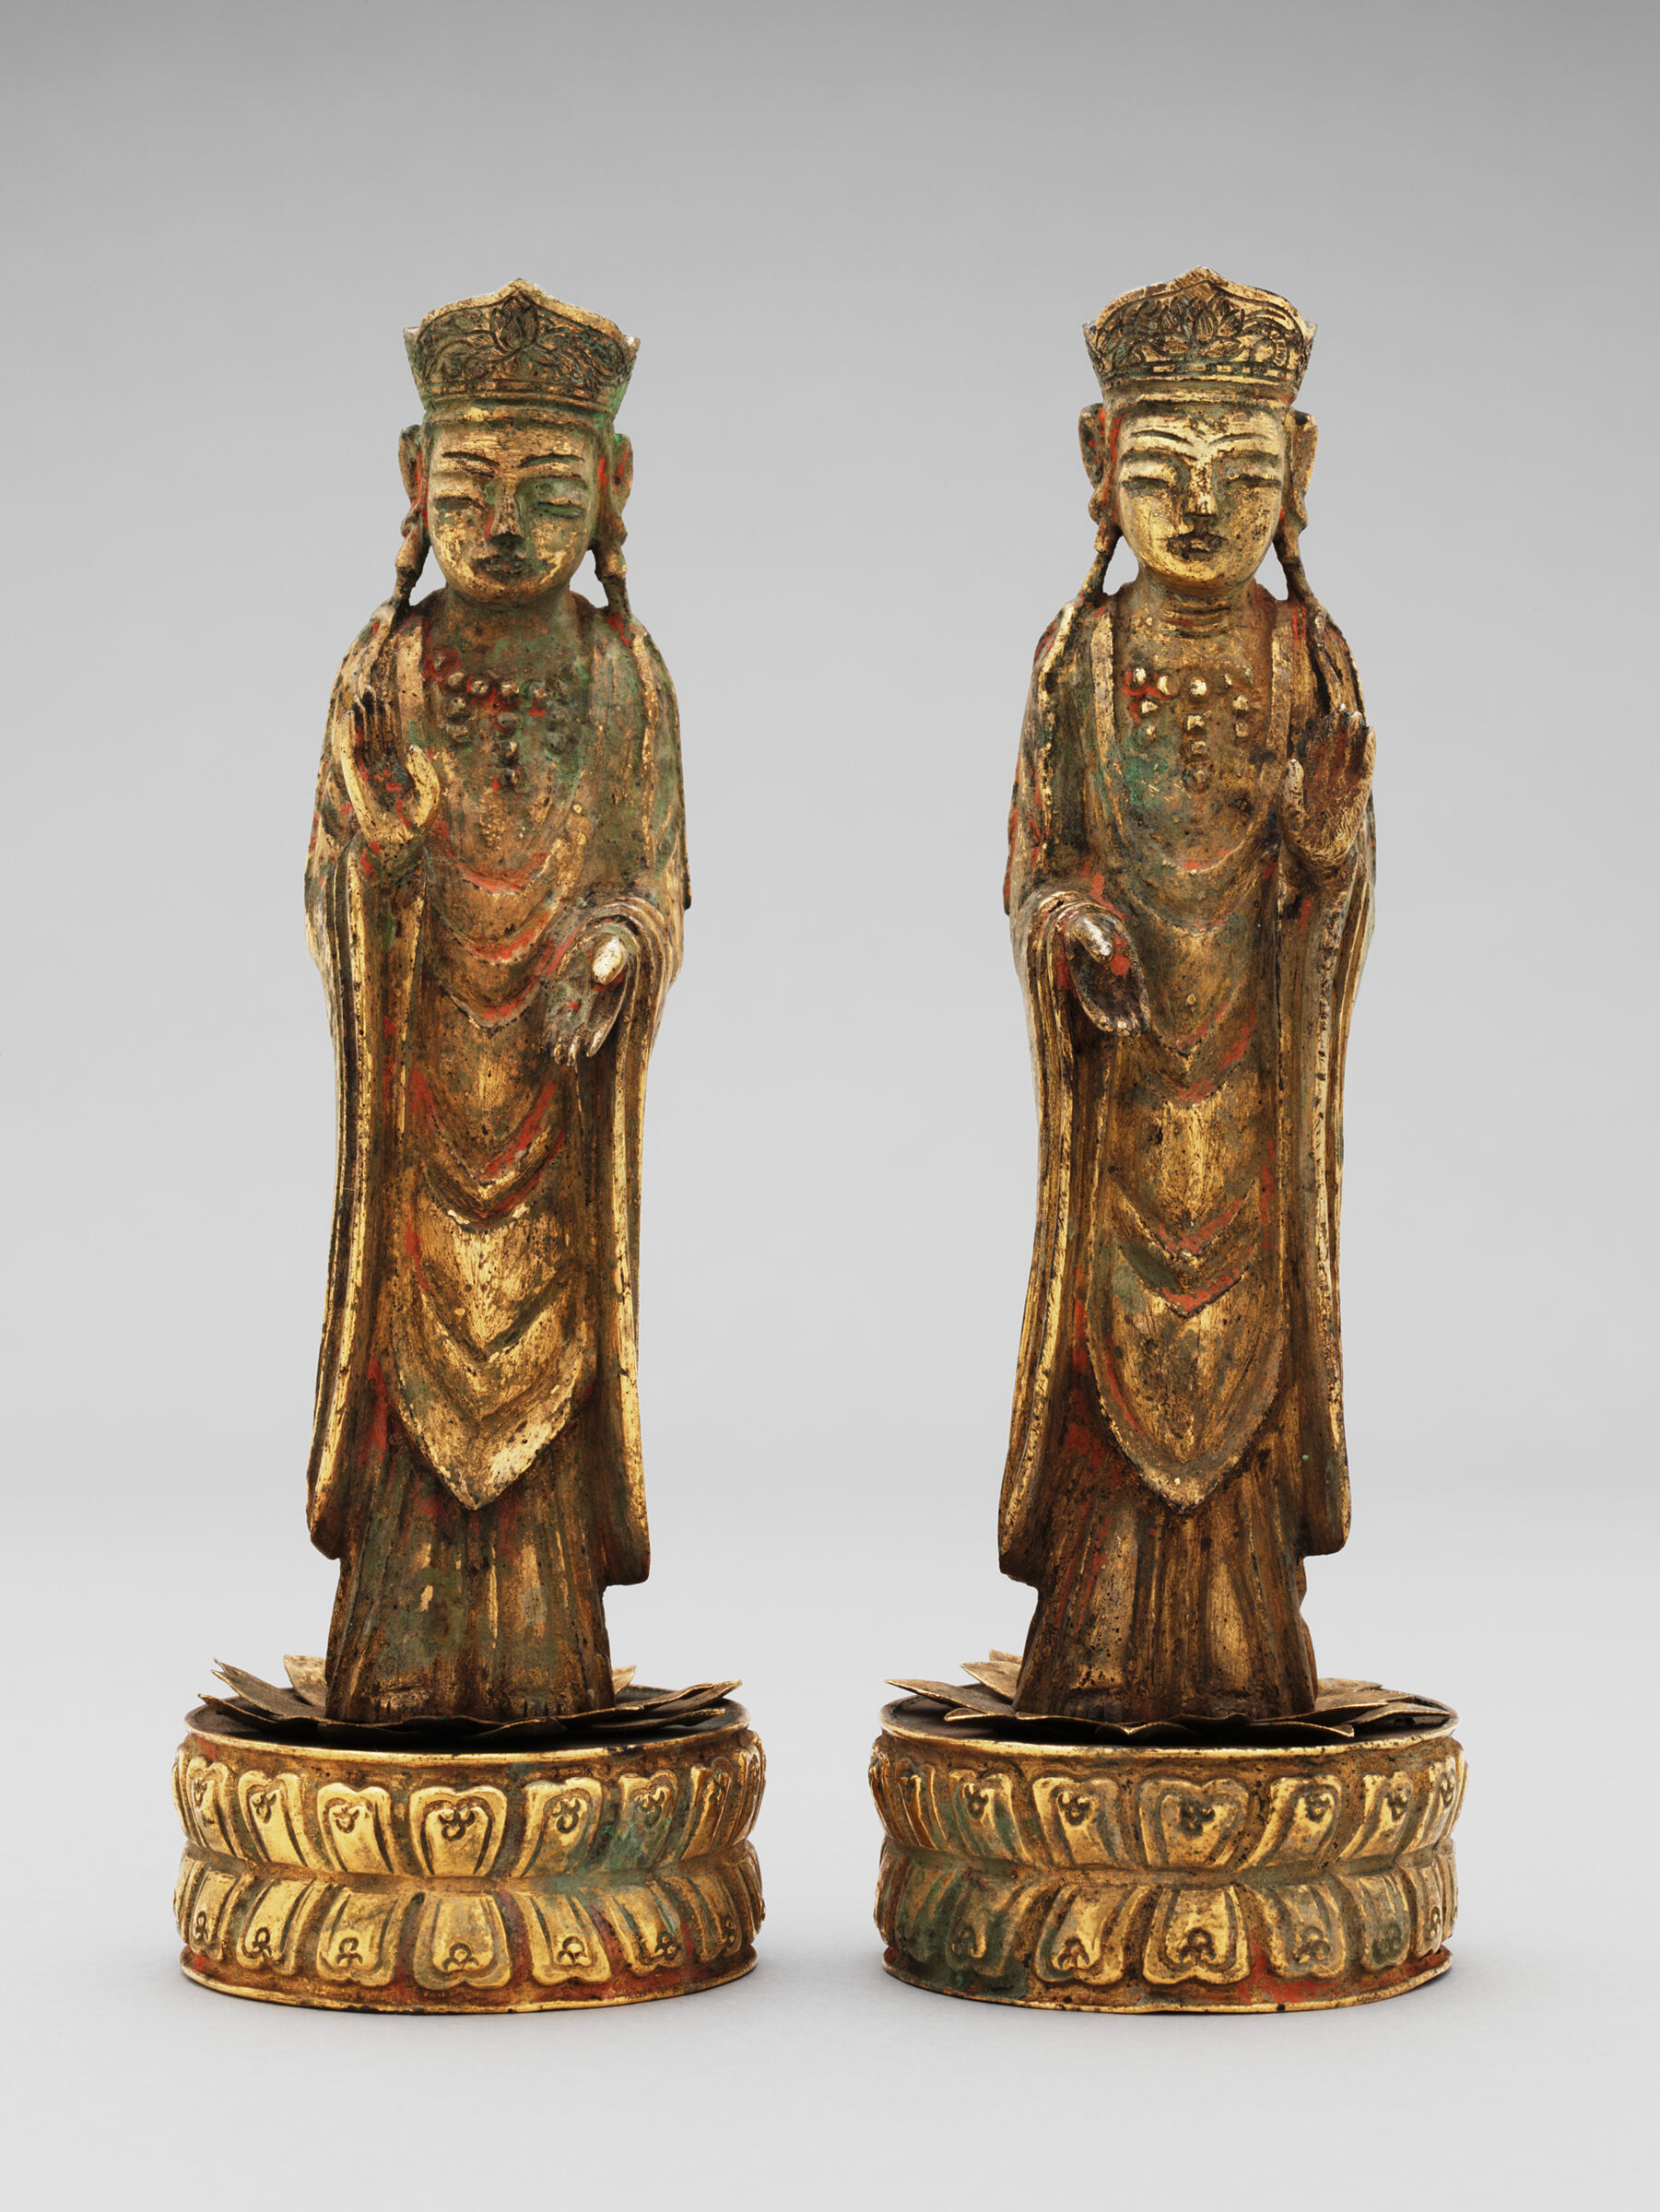 Standing Bodhisattva On A Circular Lotus Base (One Of A Pair) From The Interior Of A Portable Buddhist Shrine With Repoussé Decoration